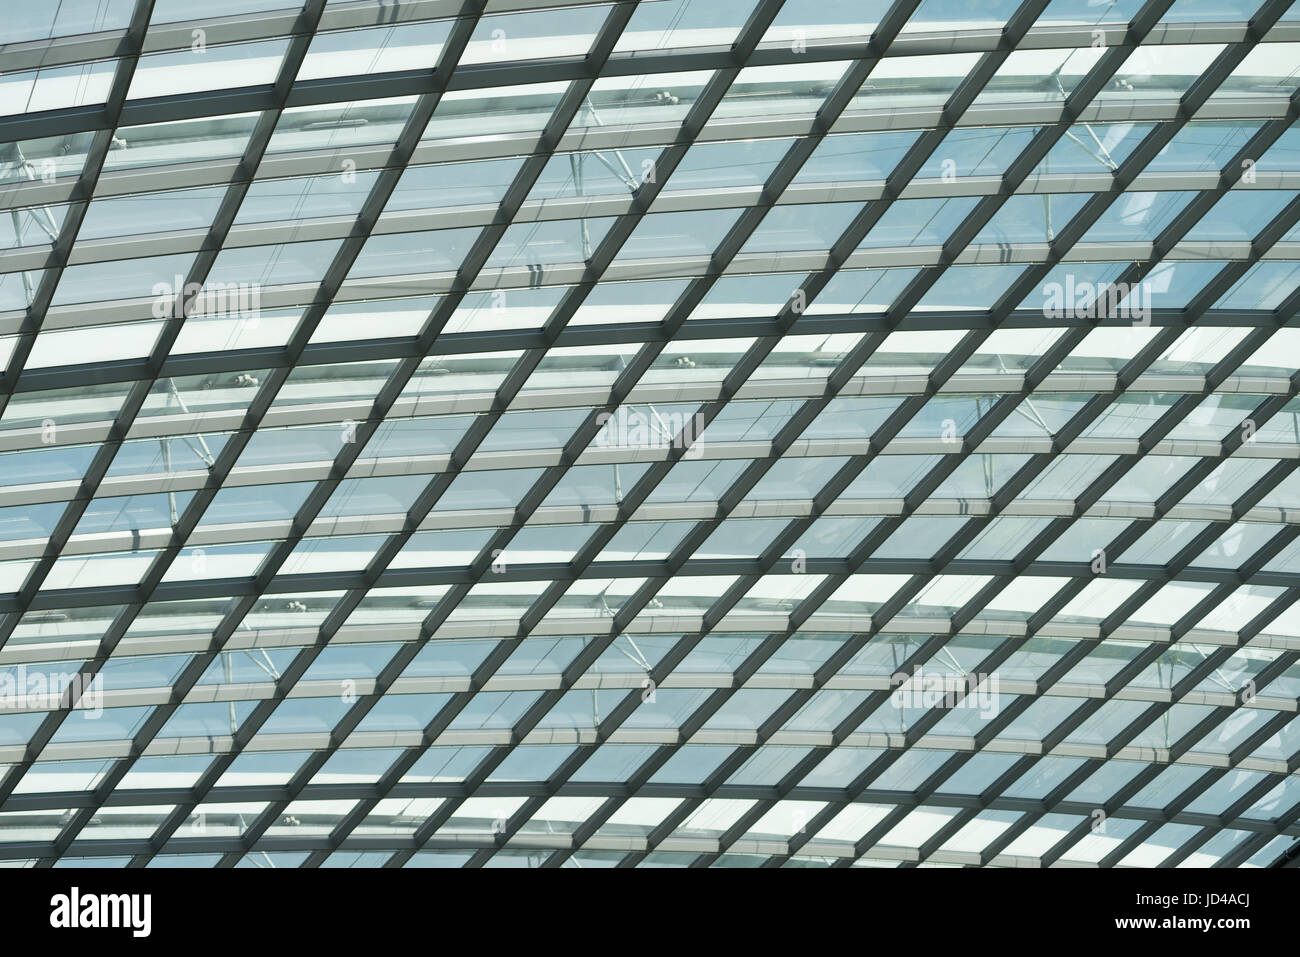 Skylight roof structure of glass and stee interlacedl Stock Photo